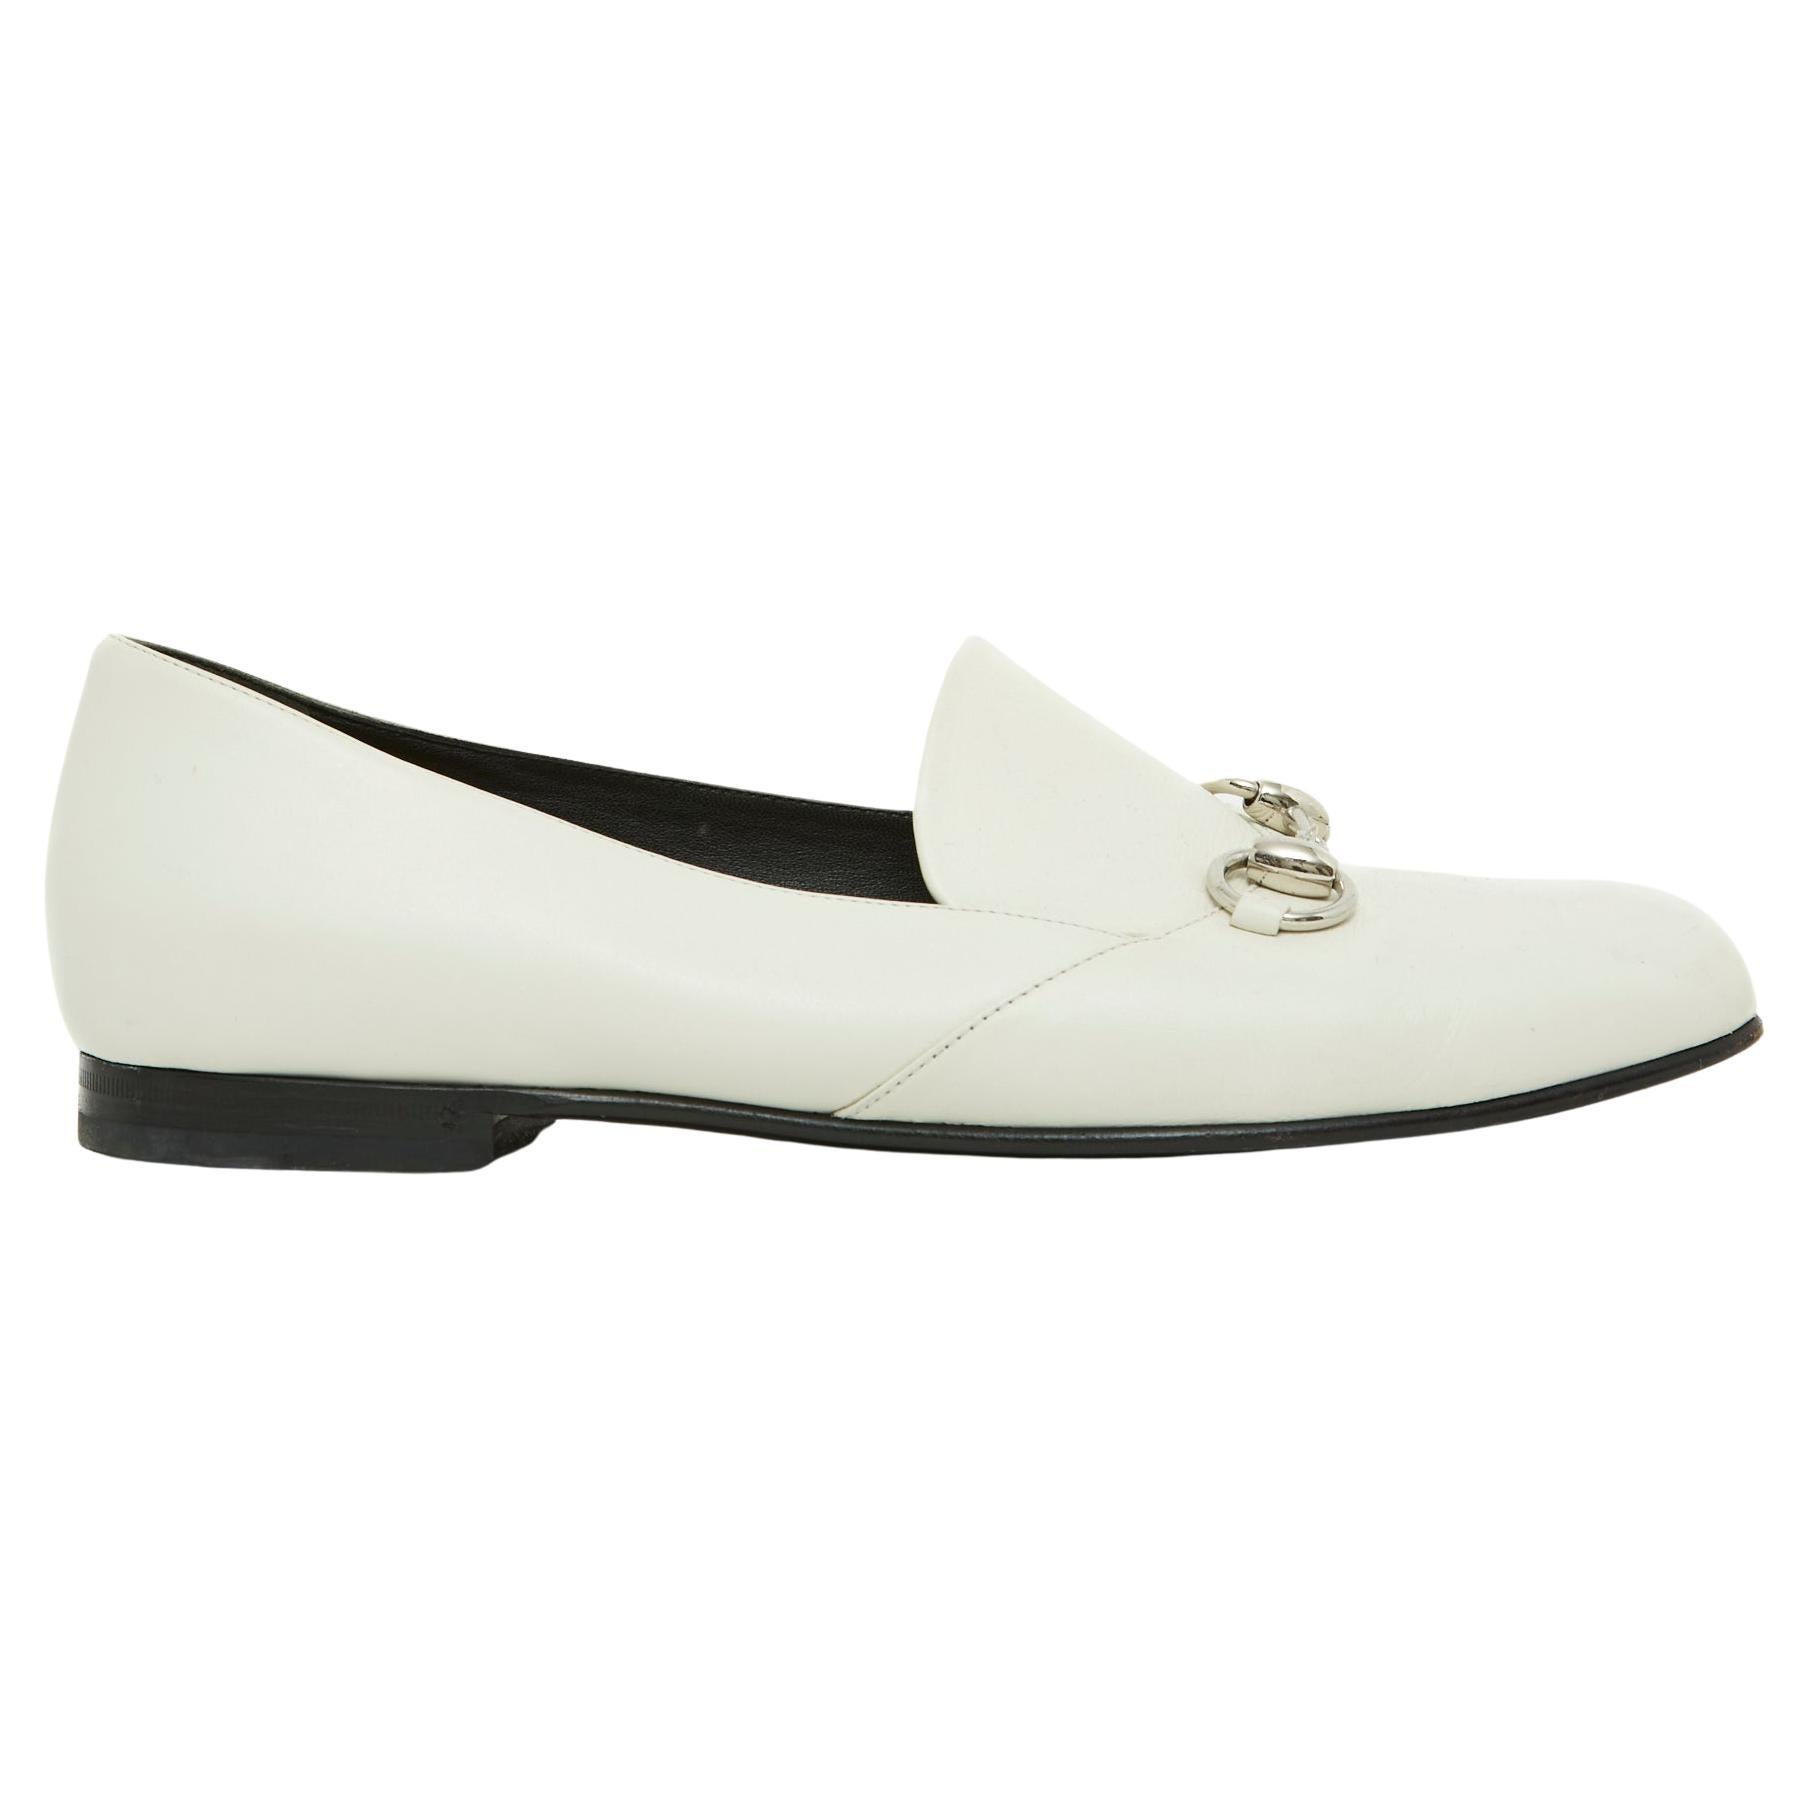 Gucci Horsebit Flats EU38 White Leather Loafers US7.5 For Sale